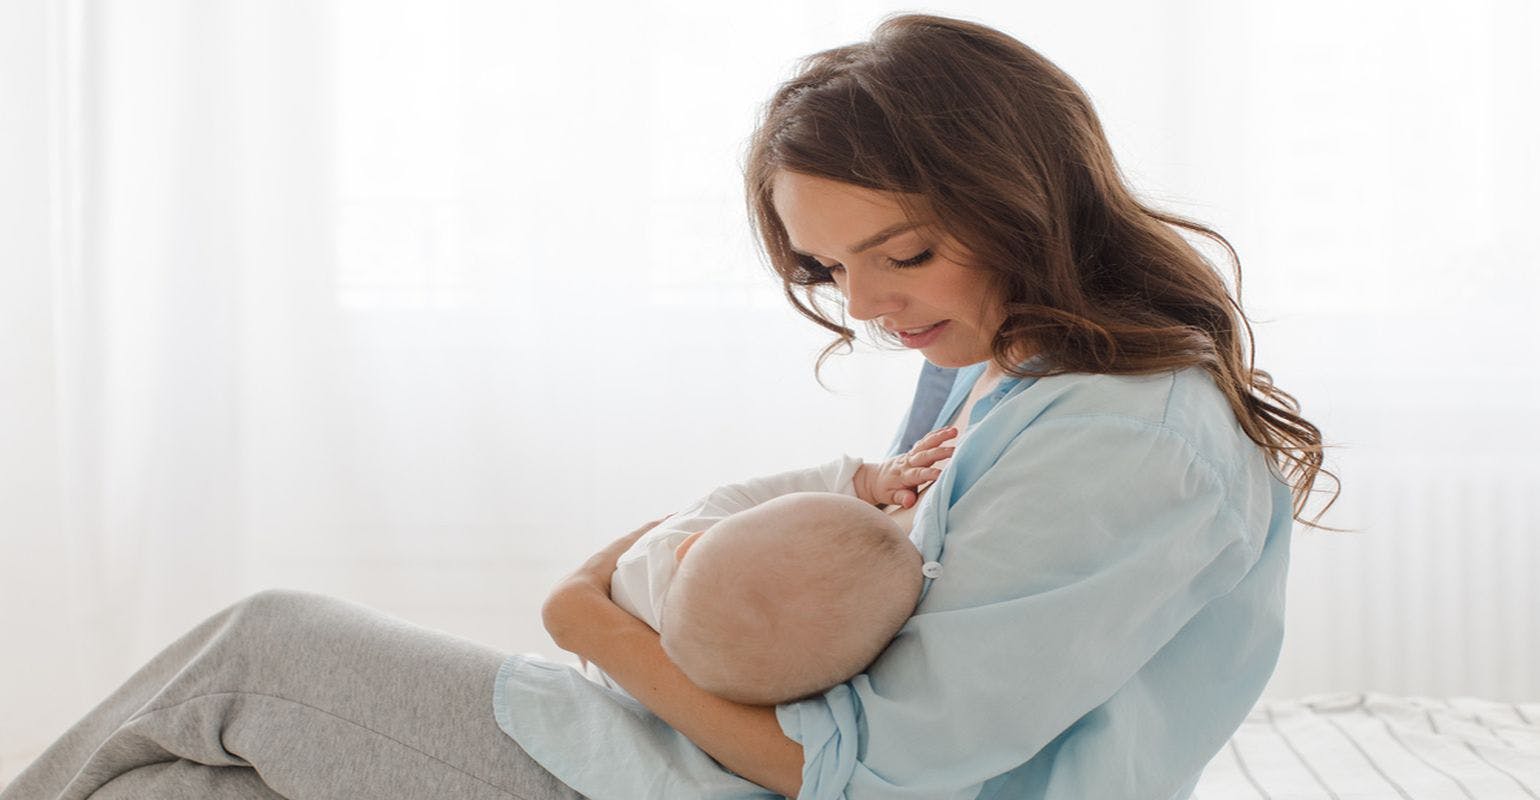 Breastfeeding Protects Infants From Antibiotic-Resistant Bacteria